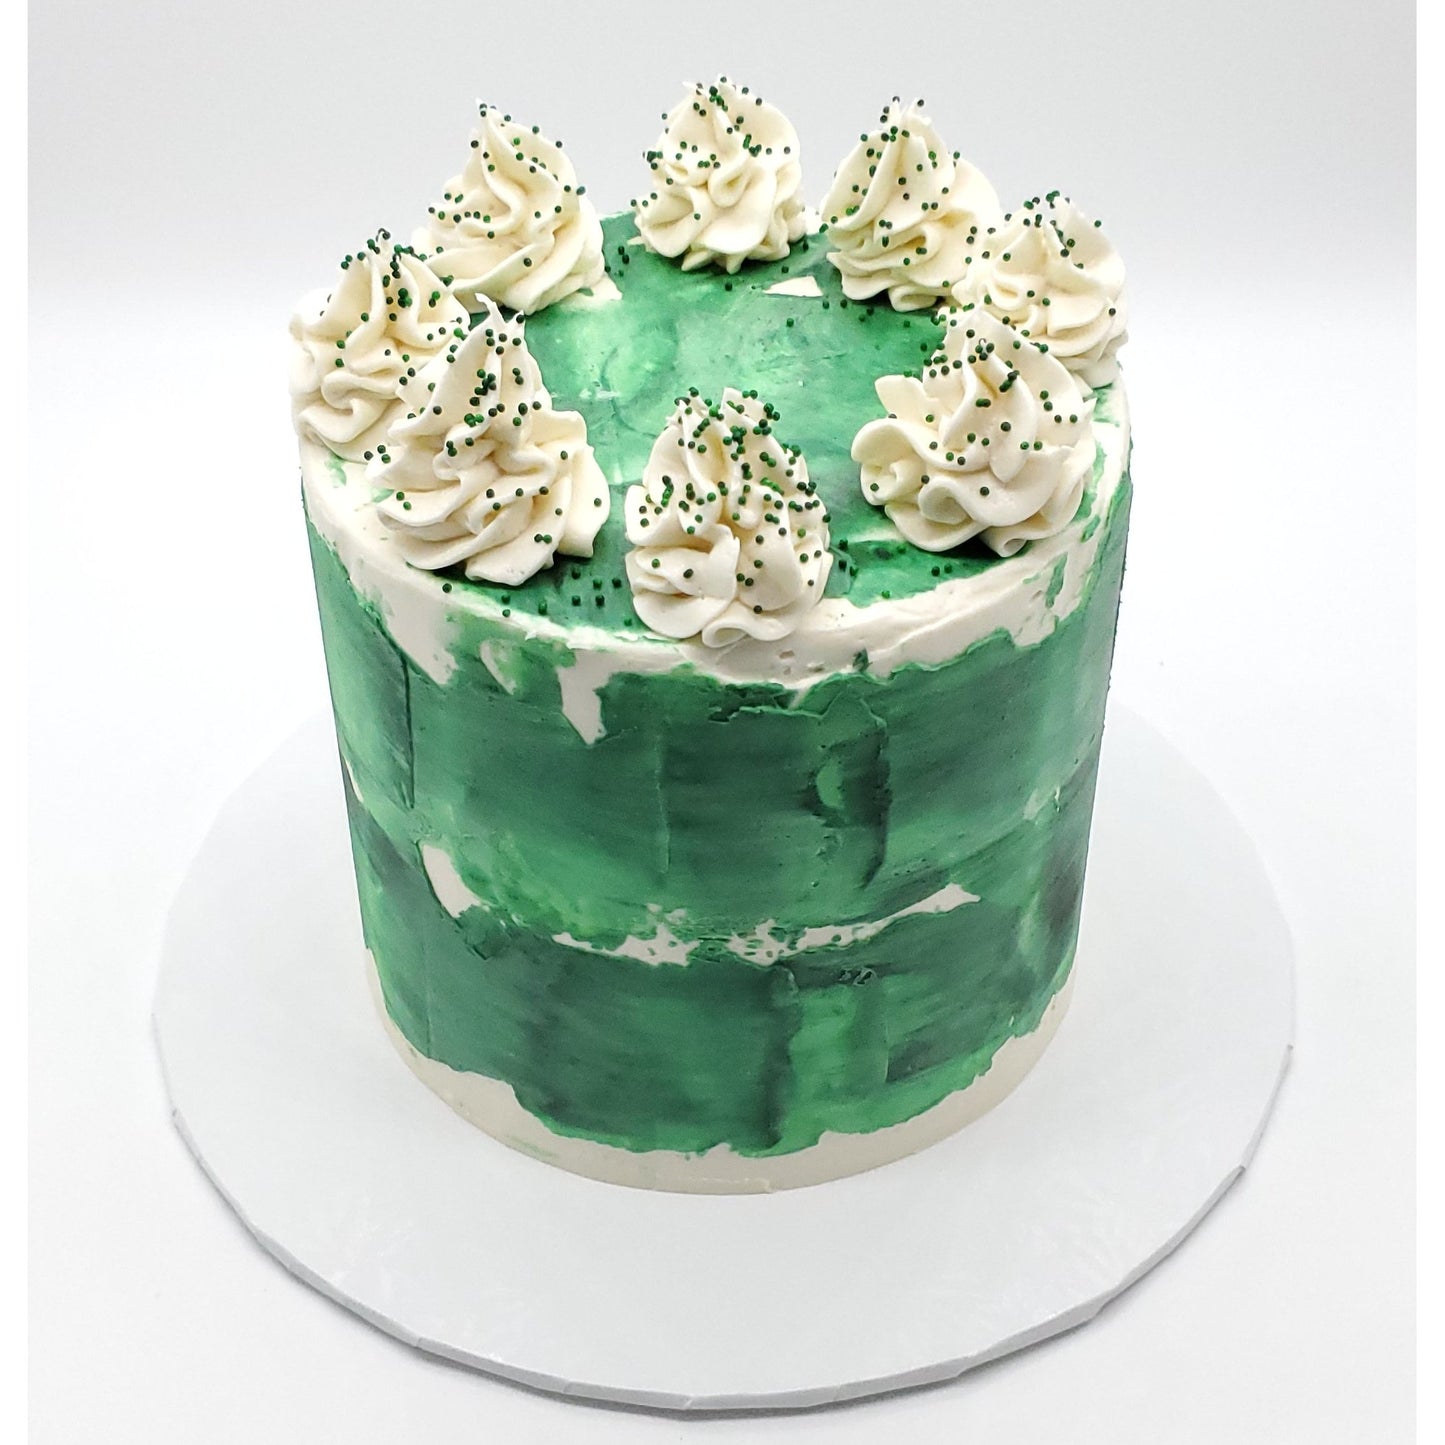 6 inch Green Tōn'd Cake with Frosting and Sprinkles